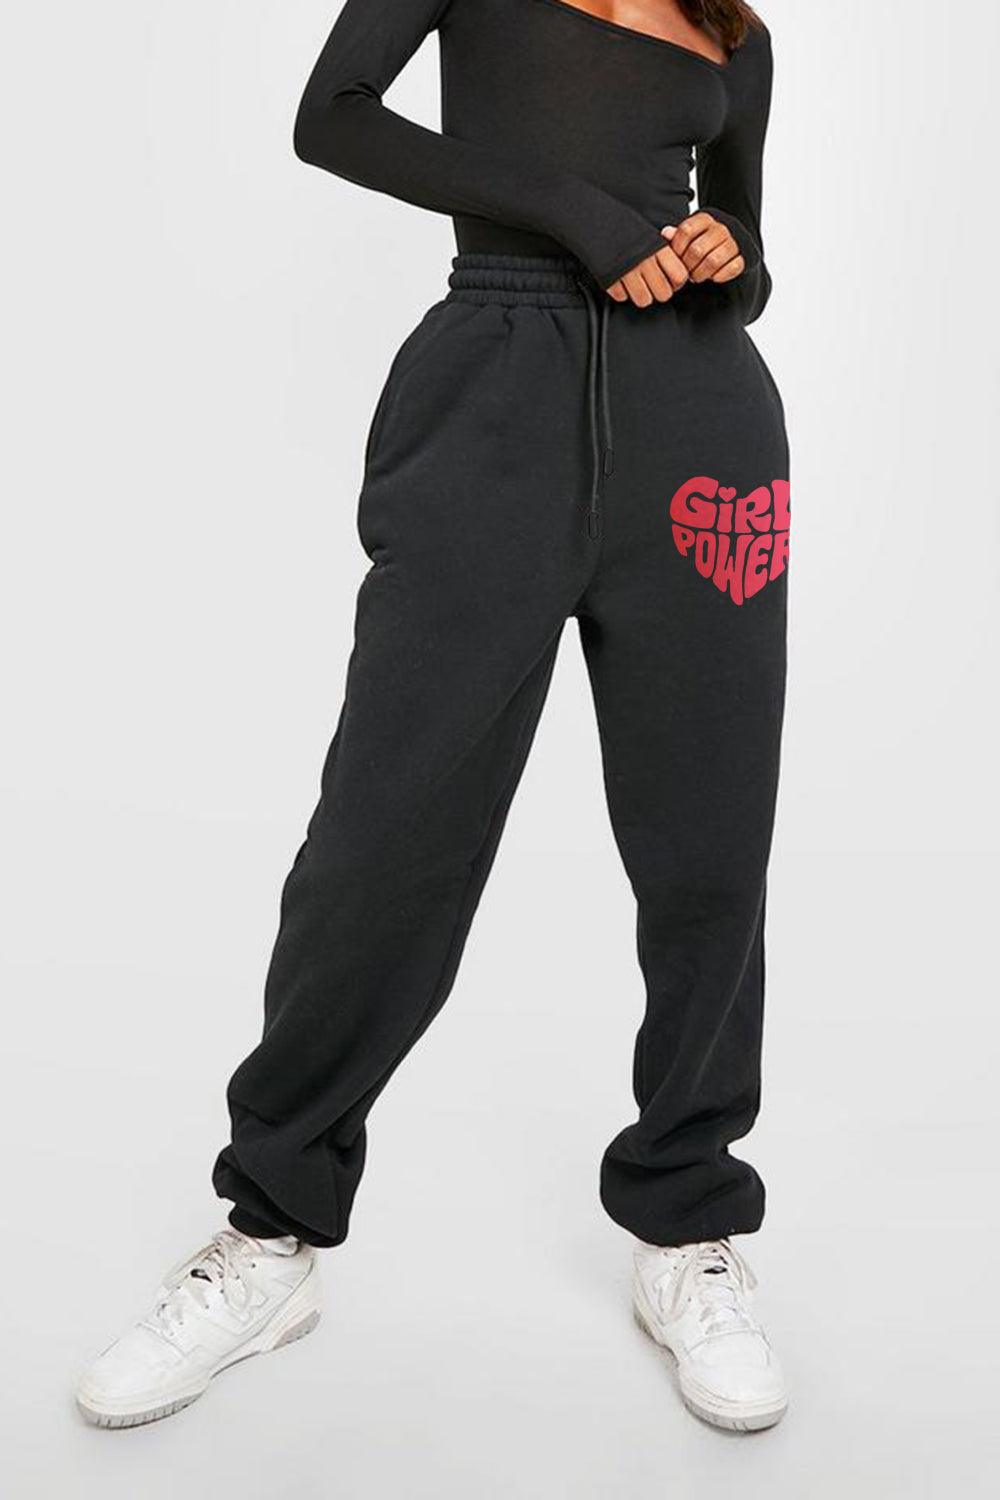 Simply Love Full Size GIRL POWER Graphic Sweatpants - Lab Fashion, Home & Health